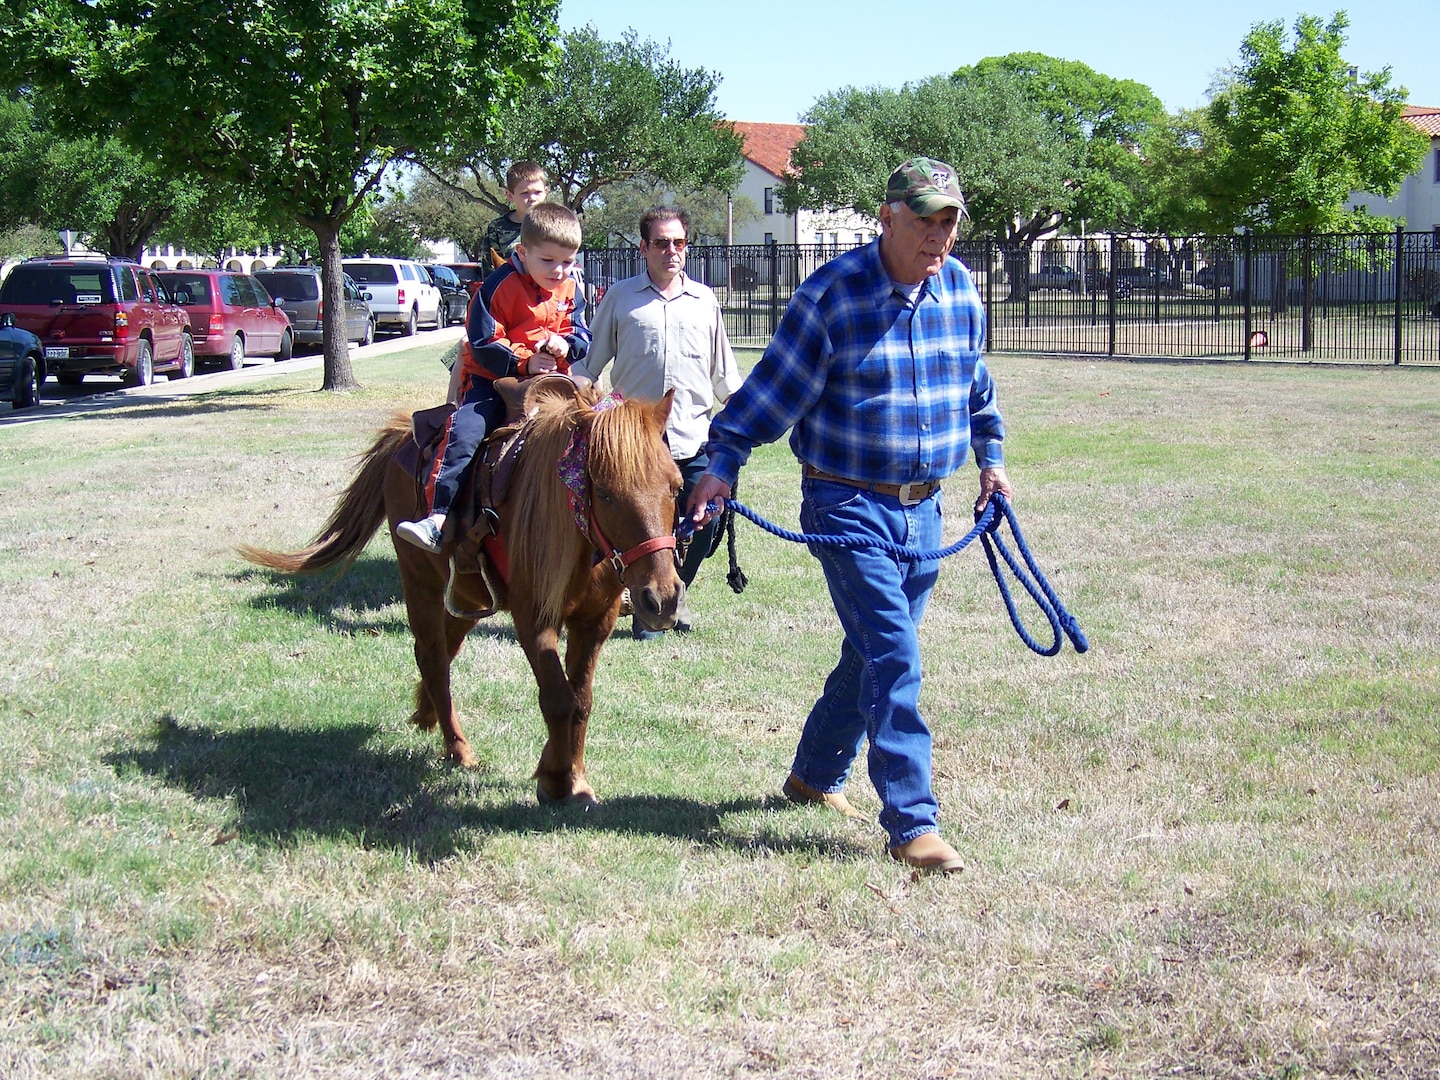 Patrick Hammond enjoys a pony ride with the help of wrangler Jim Wasaff. (Photo by Maggie Armstrong)
